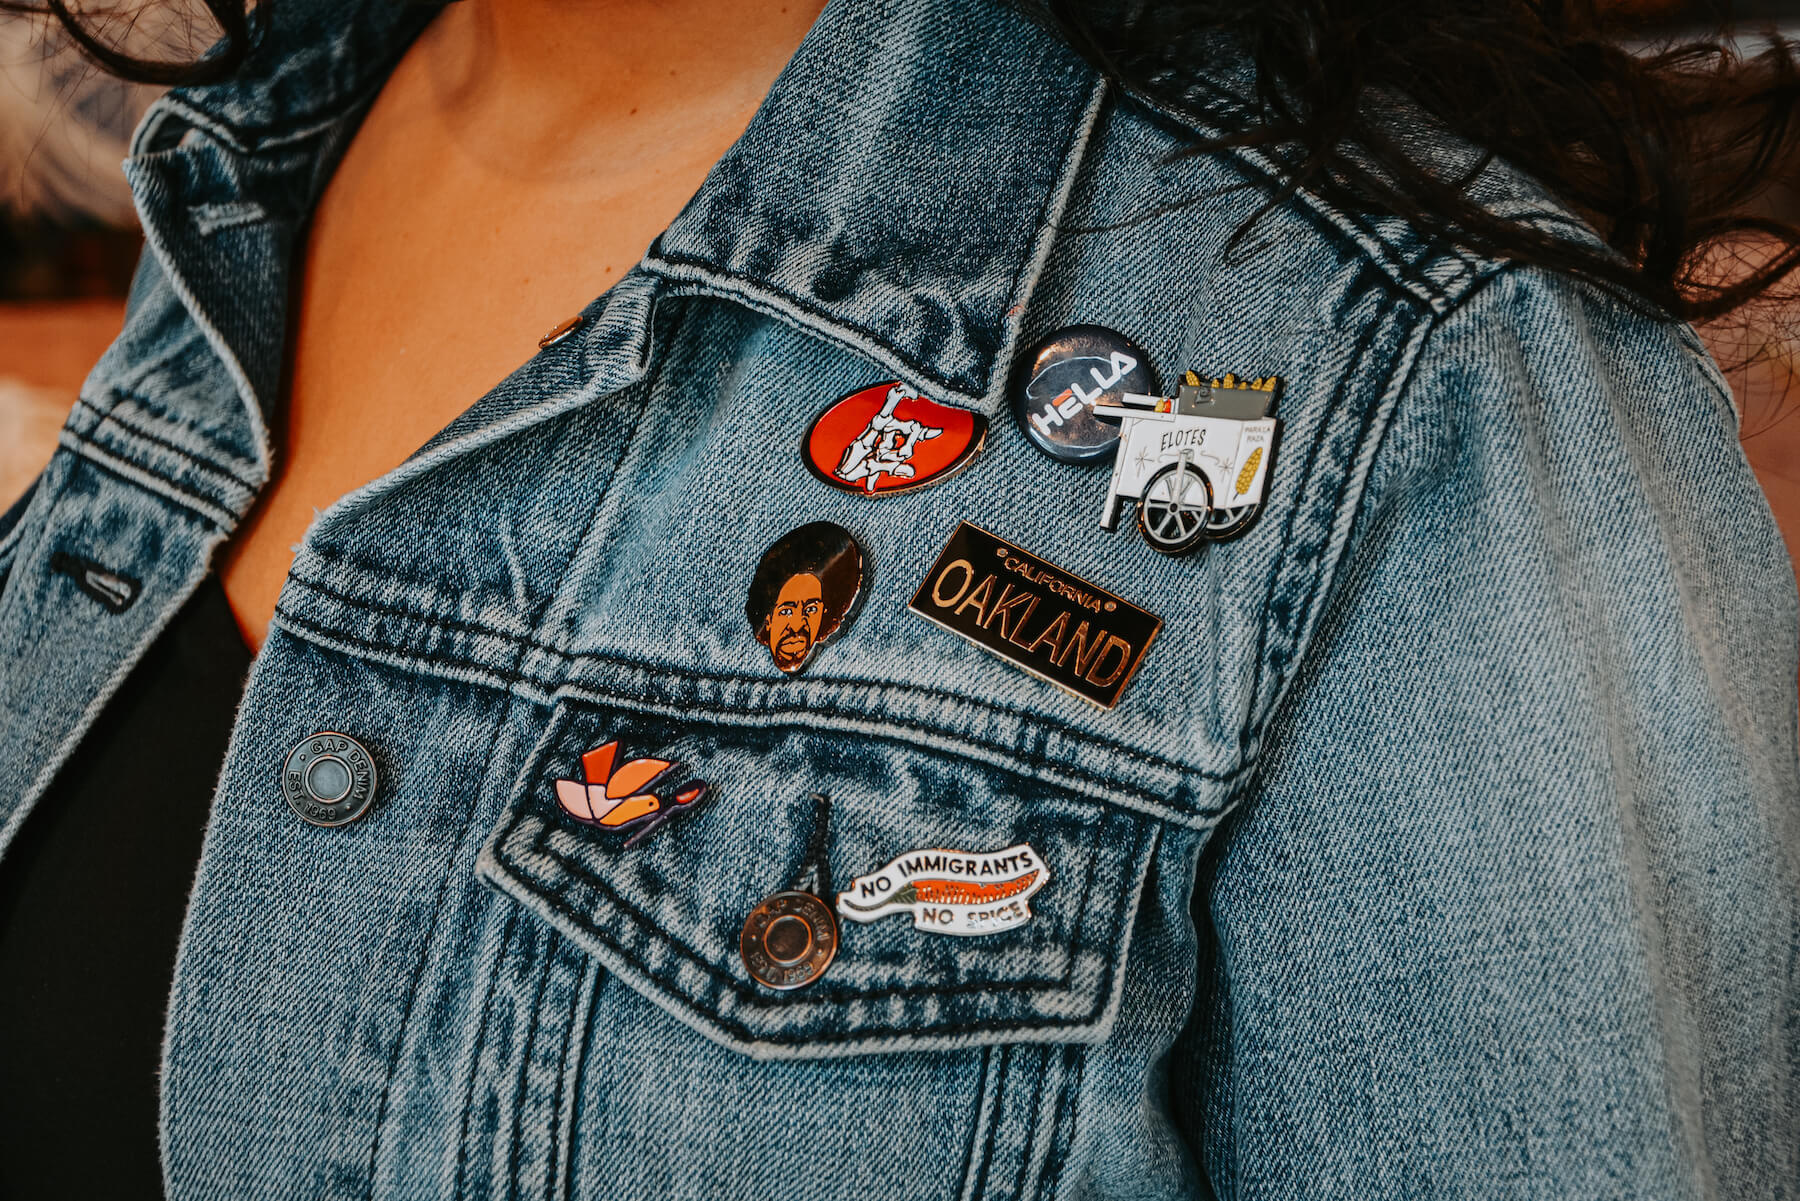 Reyna's assortment of Bay Area and immigrant pins on her denim jacket. August 2021